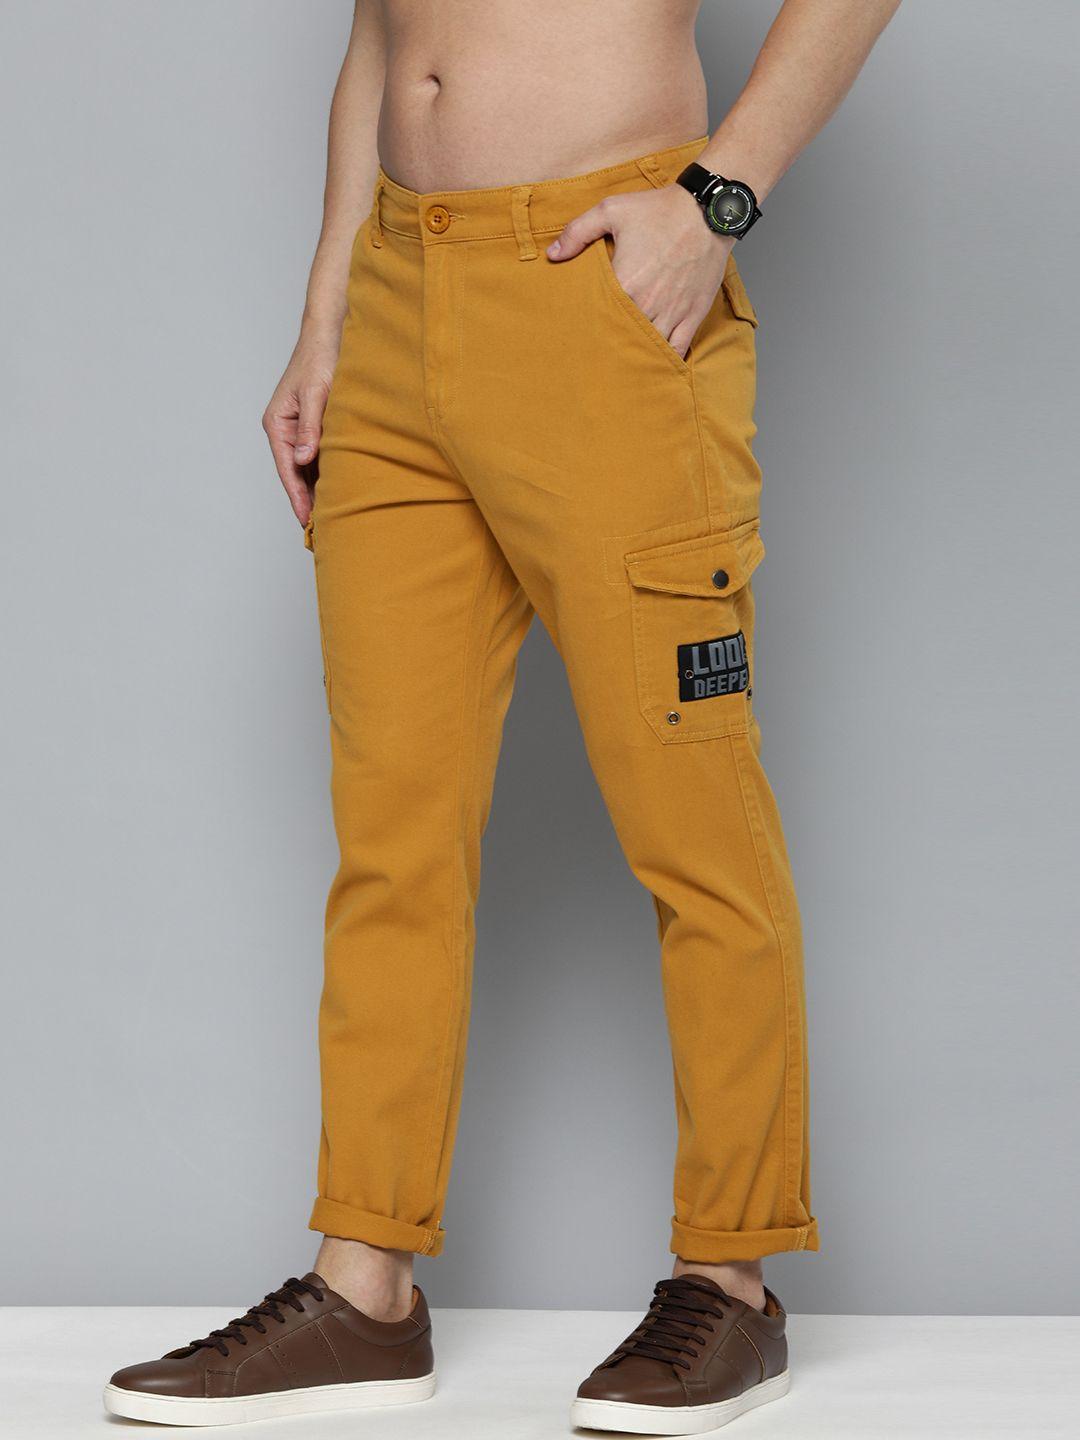 here&now men mustard yellow solid cargos trousers